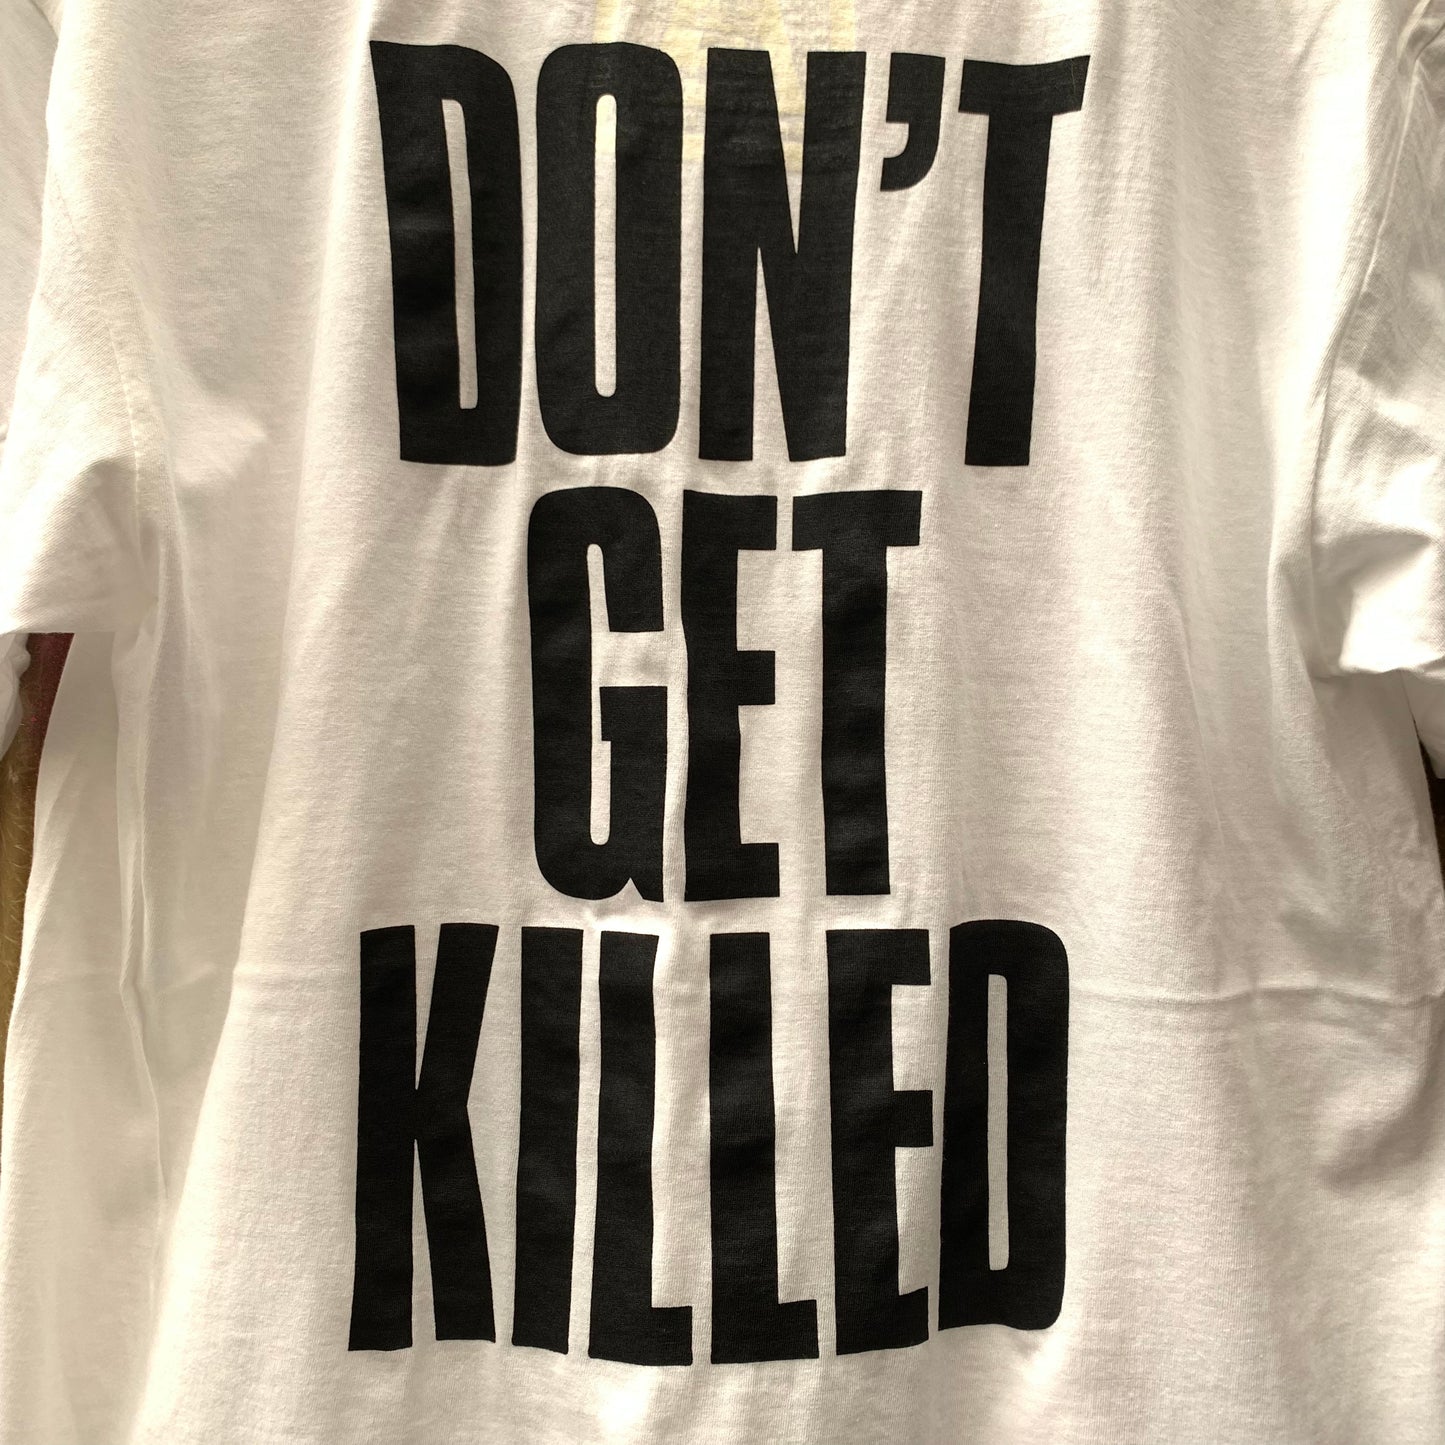 Don’t Get Killed